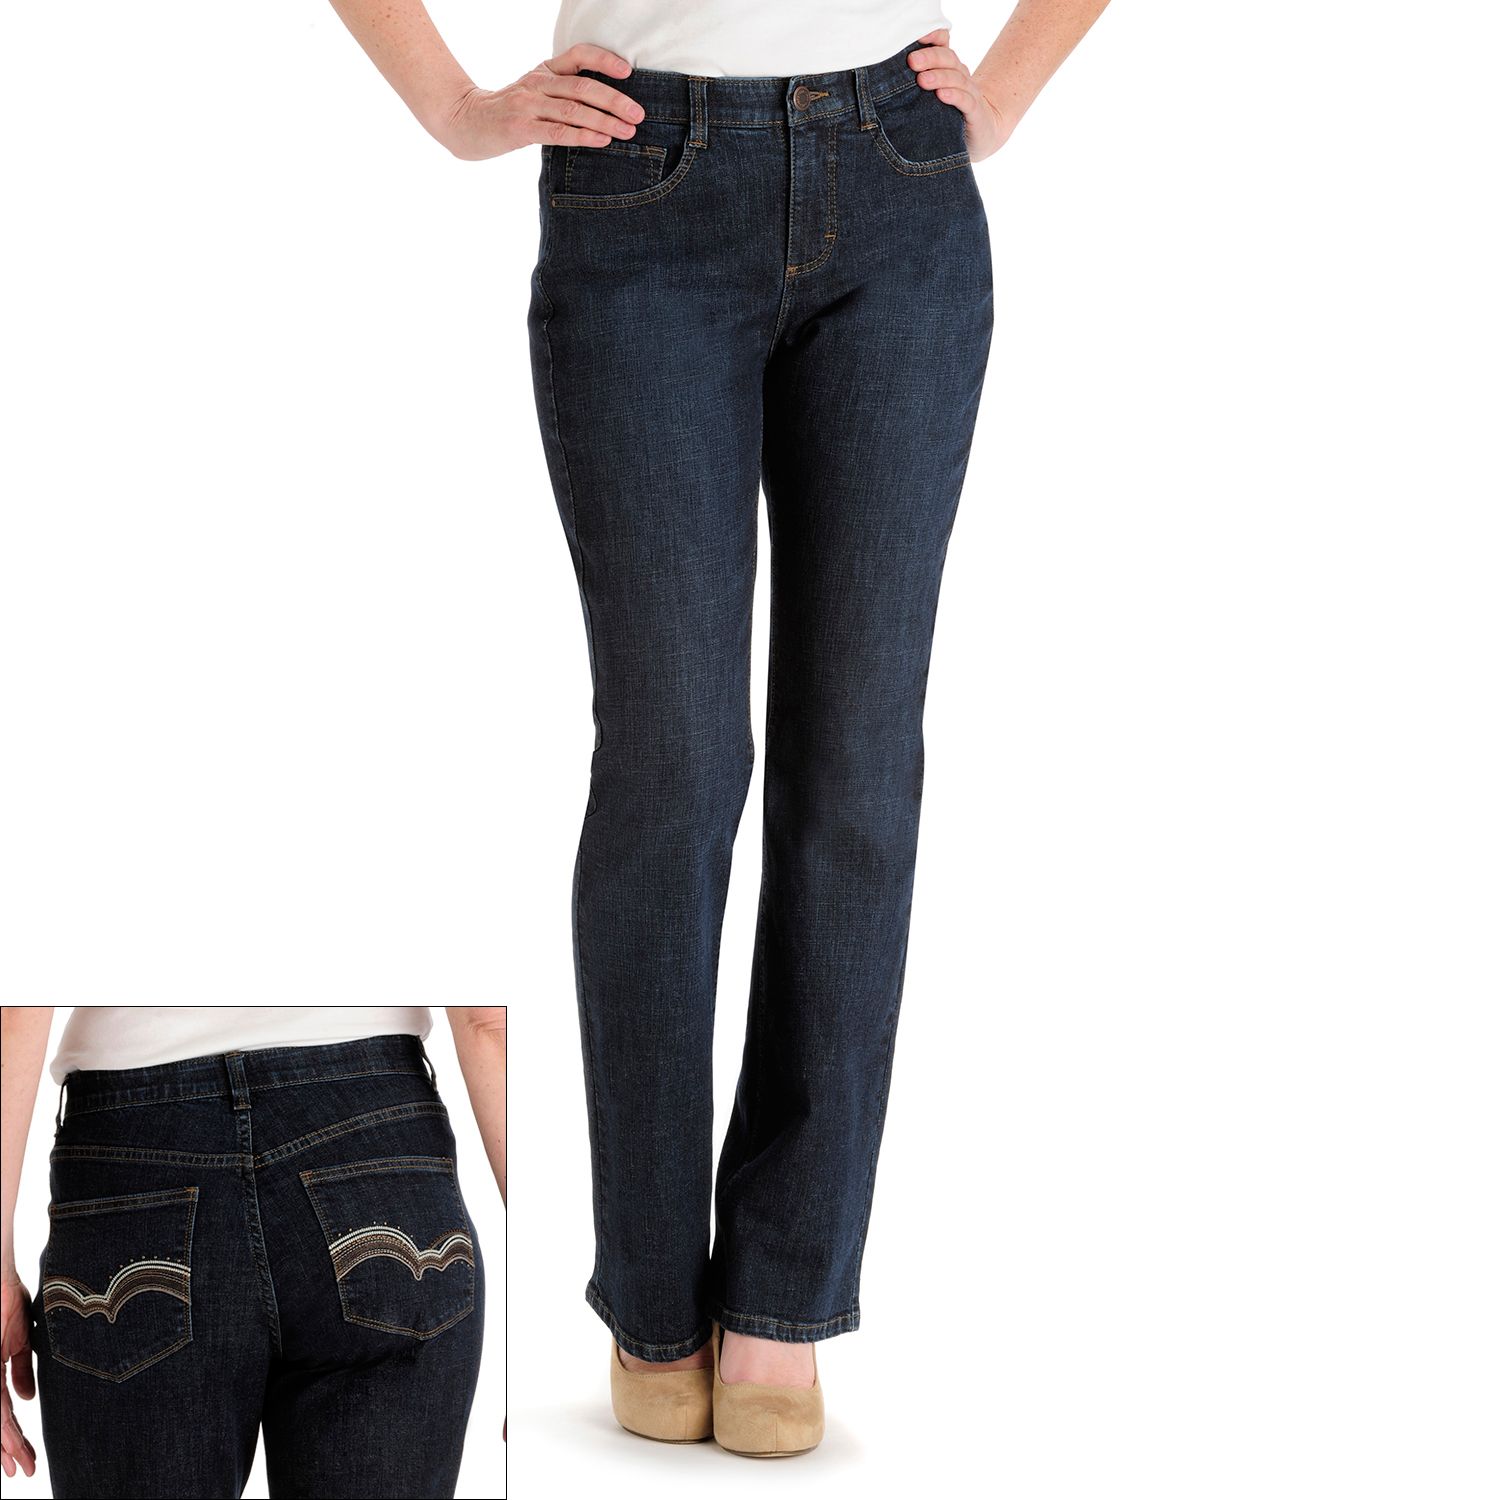 women's barely bootcut jeans